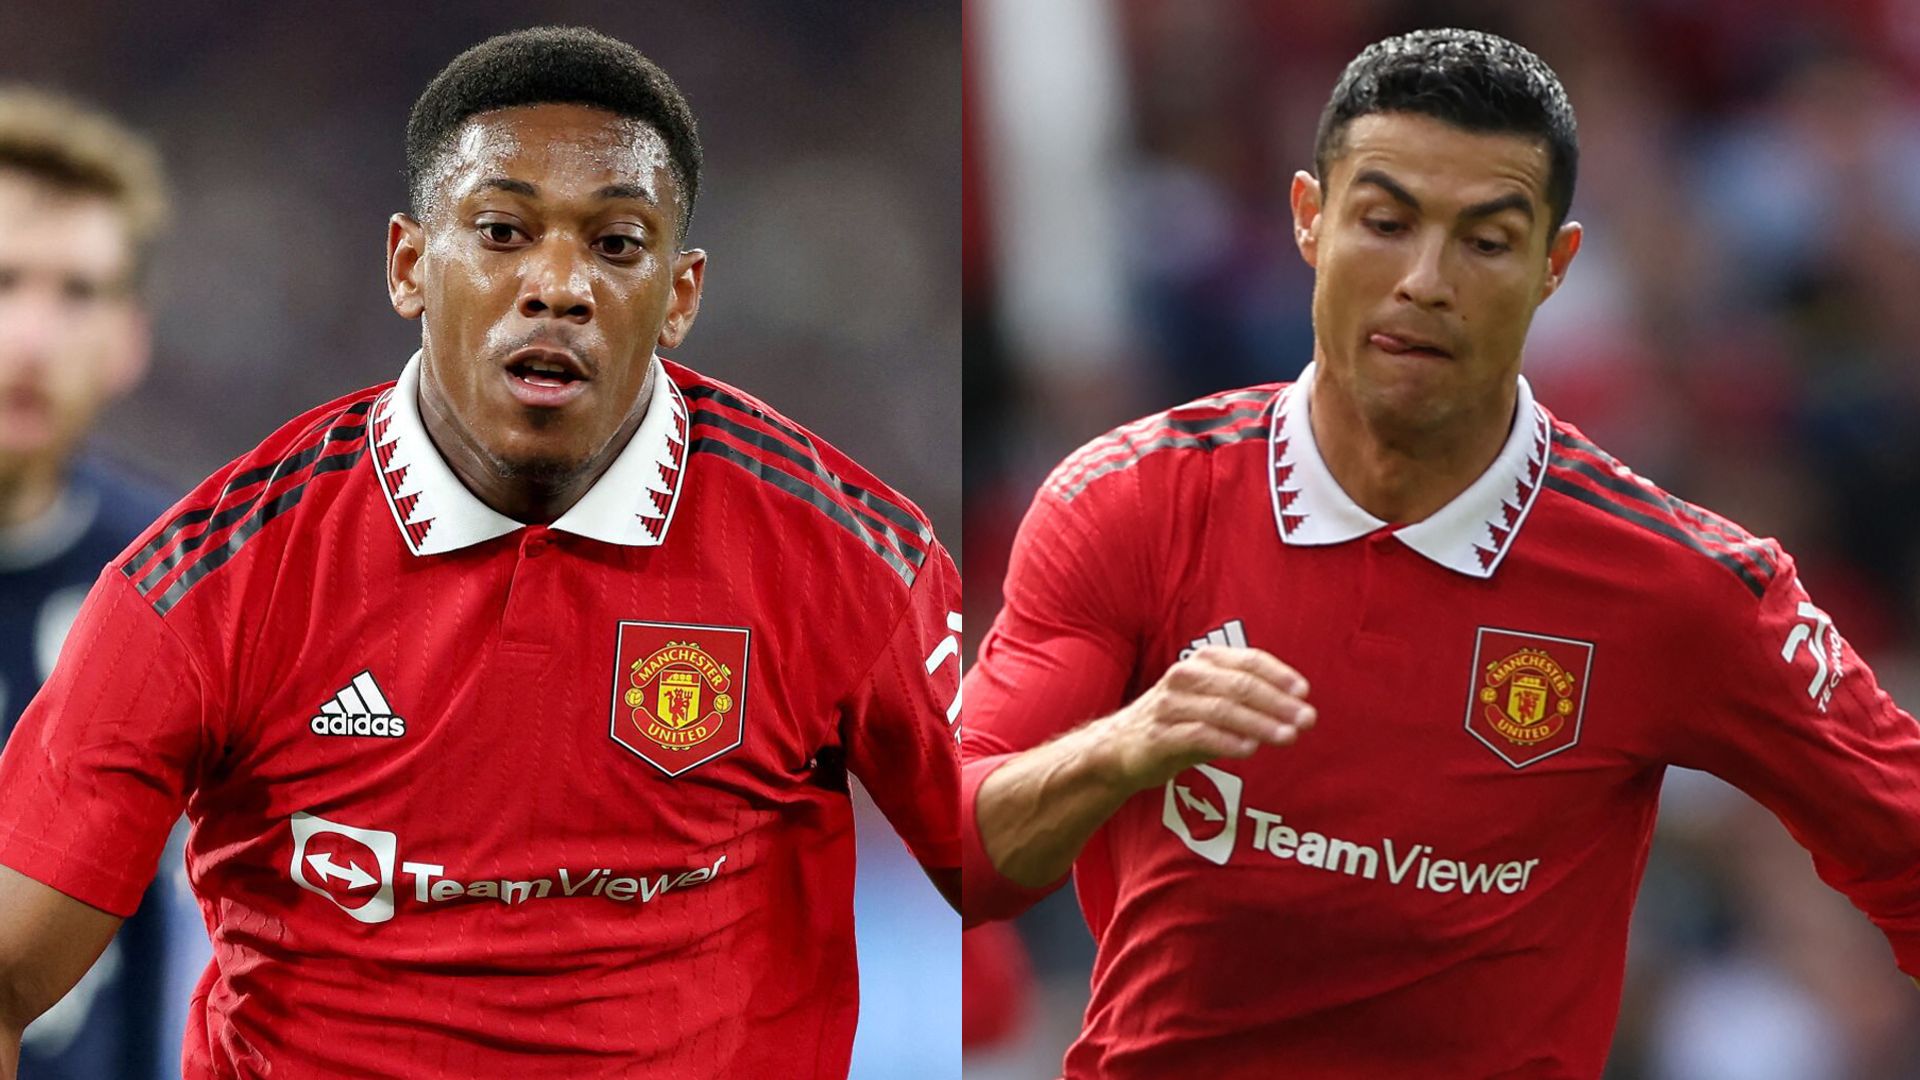 Martial out for Brighton | Will Ronaldo start? 'We'll see', says Ten Hag